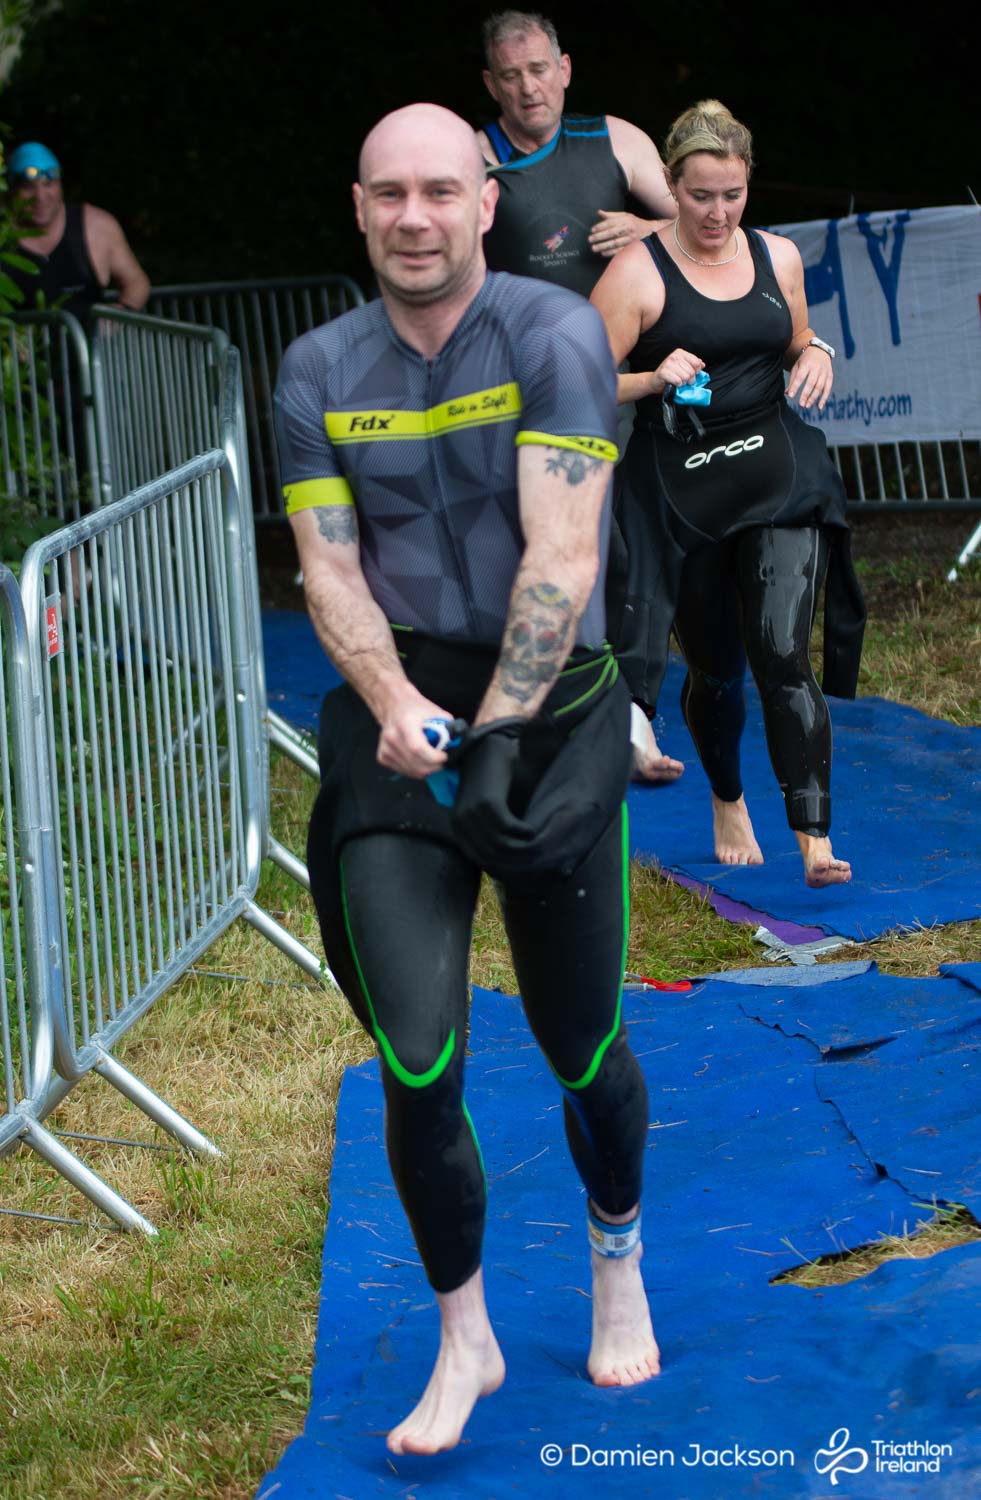 Athy_2018 (126 of 526) - TriAthy - XII Edition - 2nd June 2018